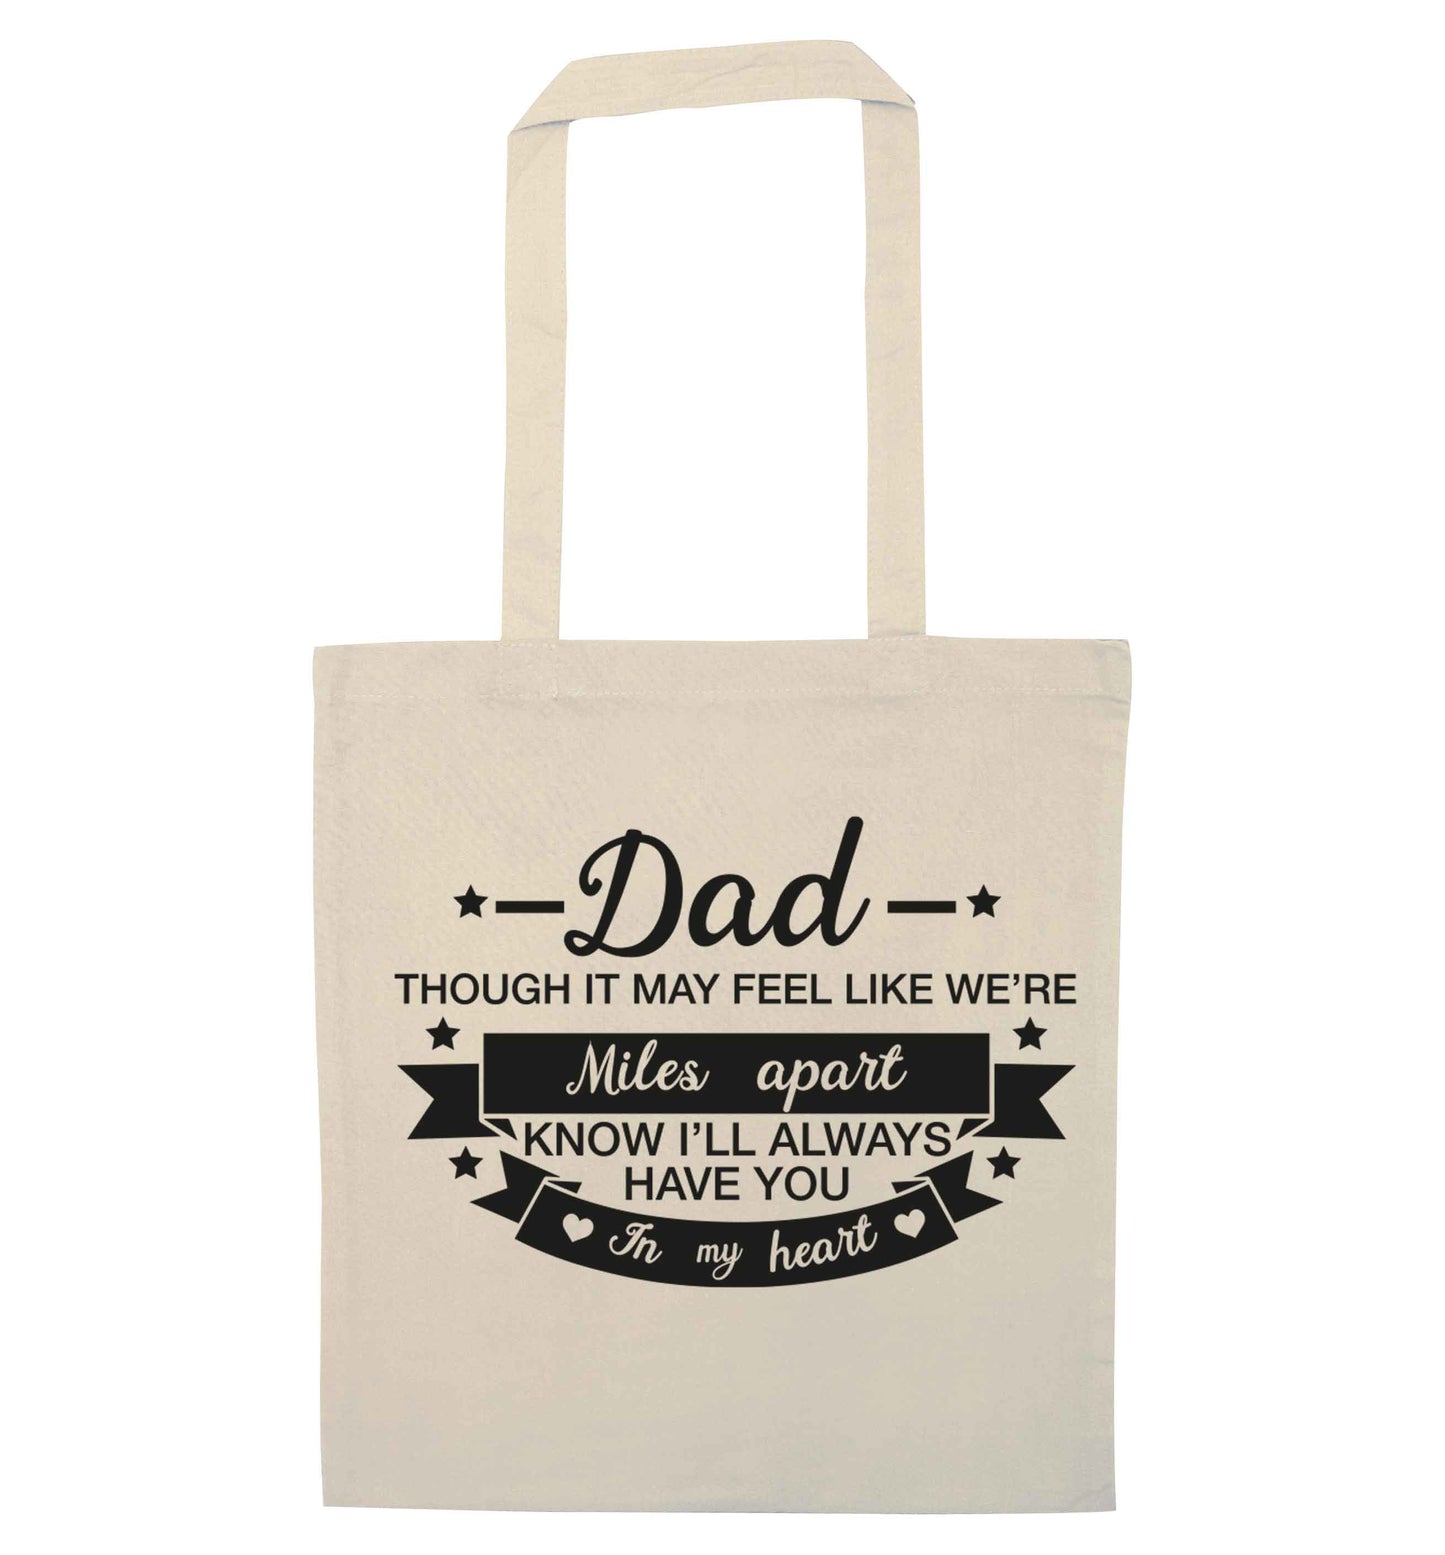 Dad though it may feel like we're miles apart know I'll always have you in my heart natural tote bag